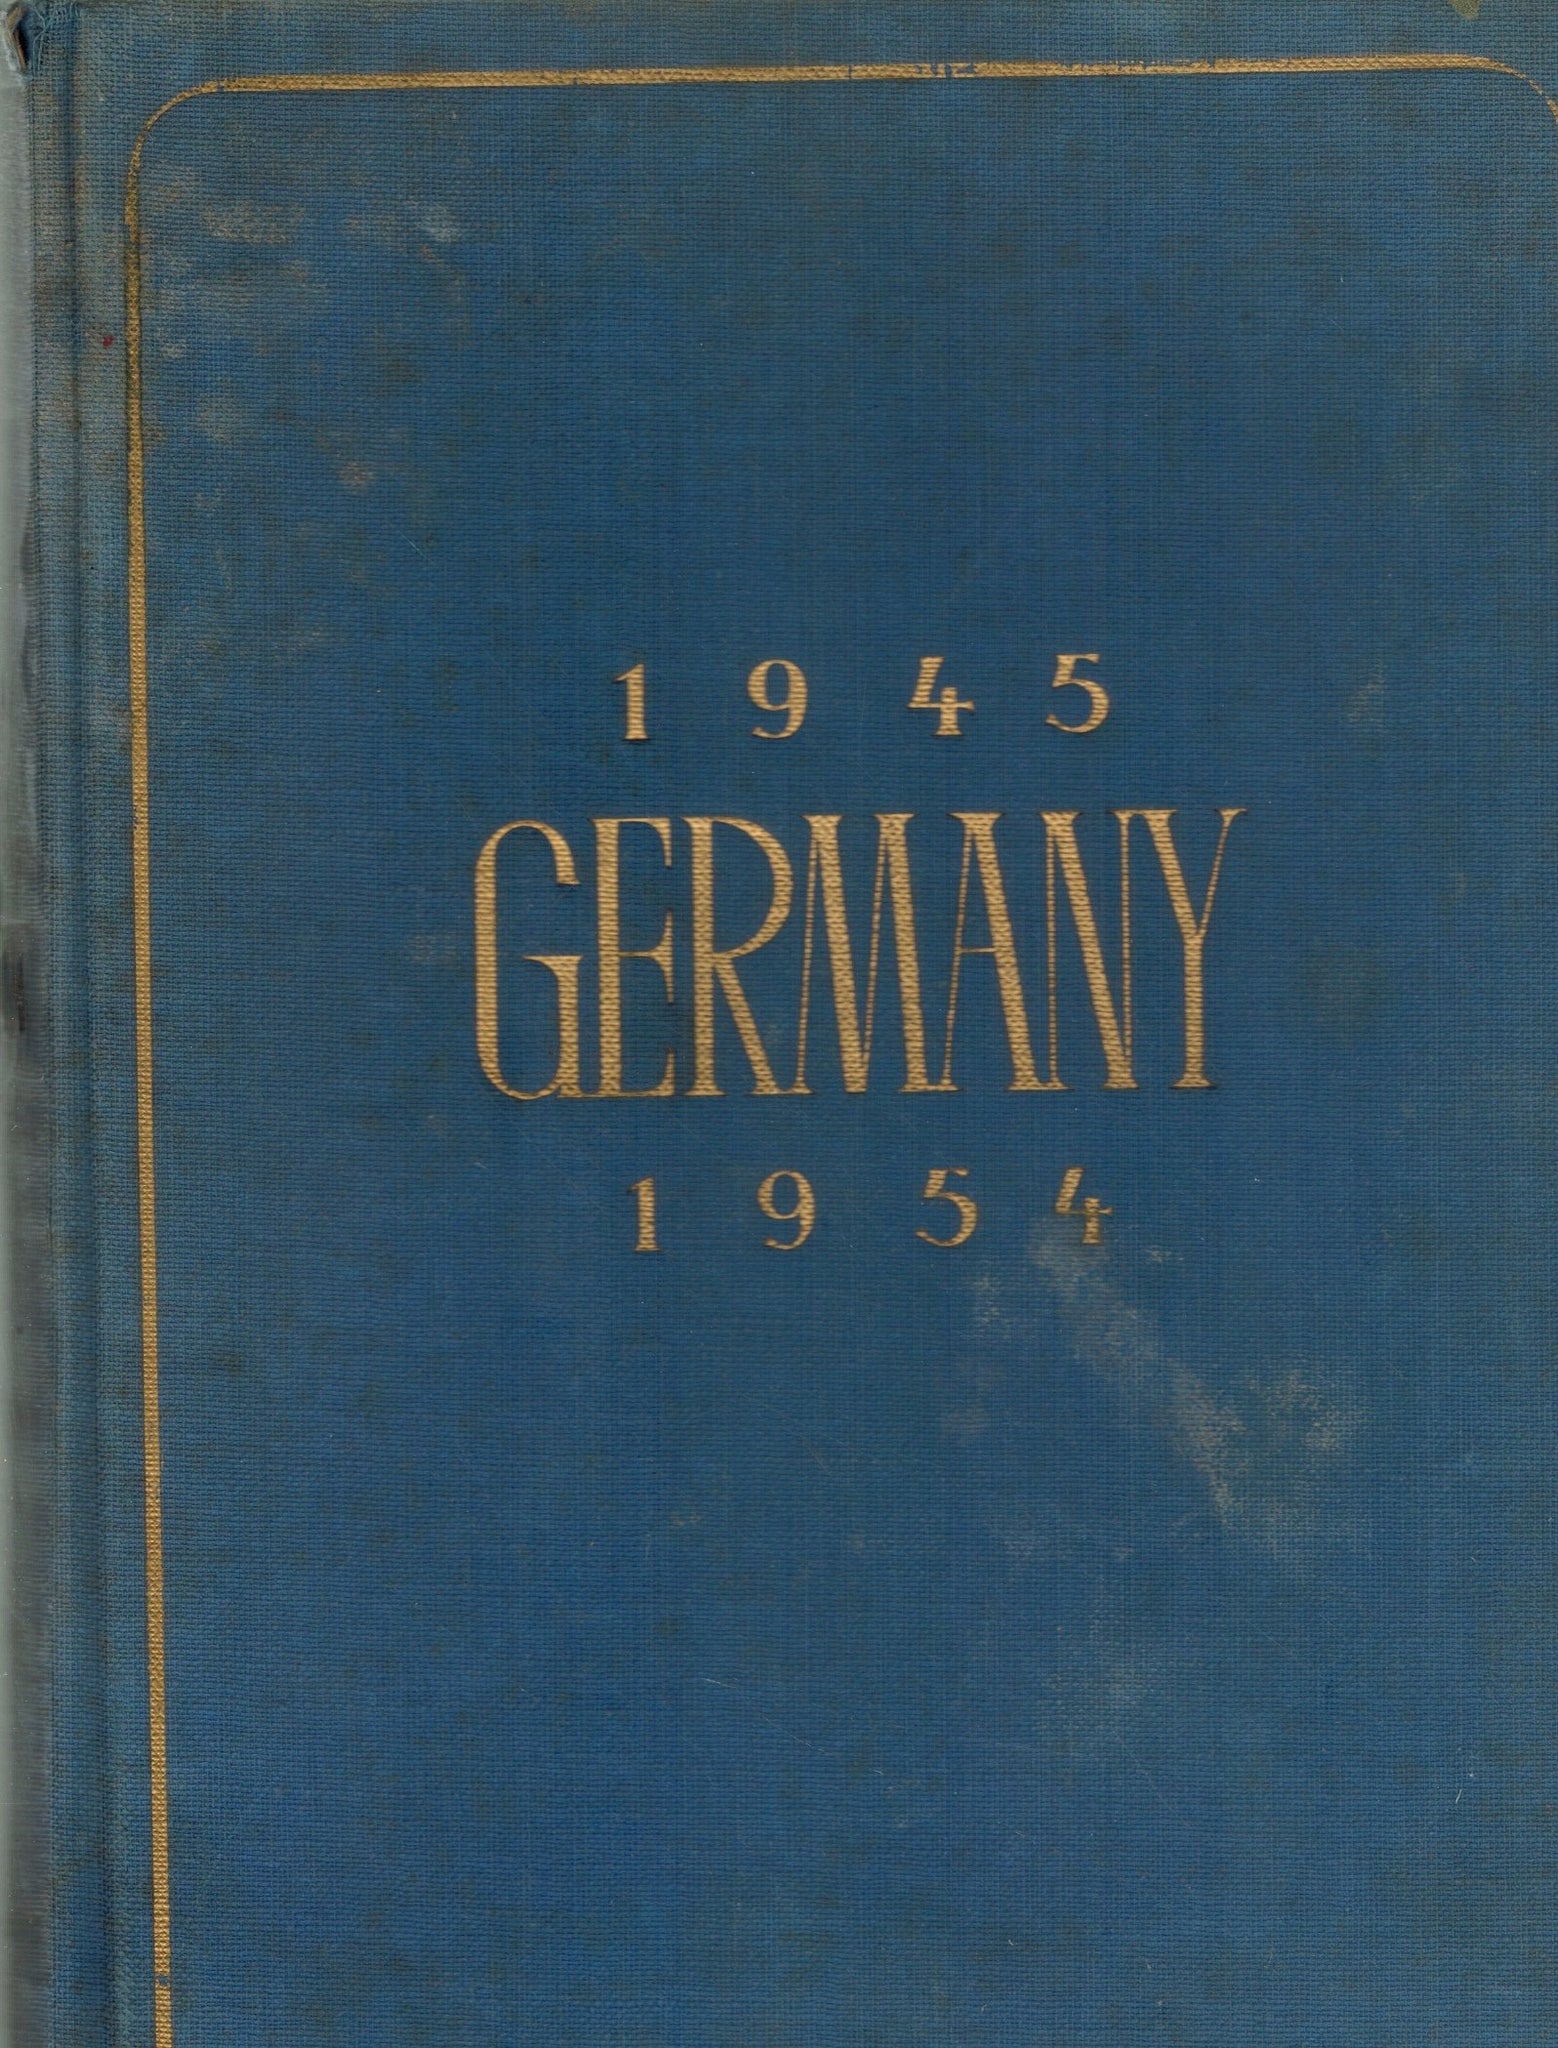 GERMANY 1945-1954  by Boas (Publisher)